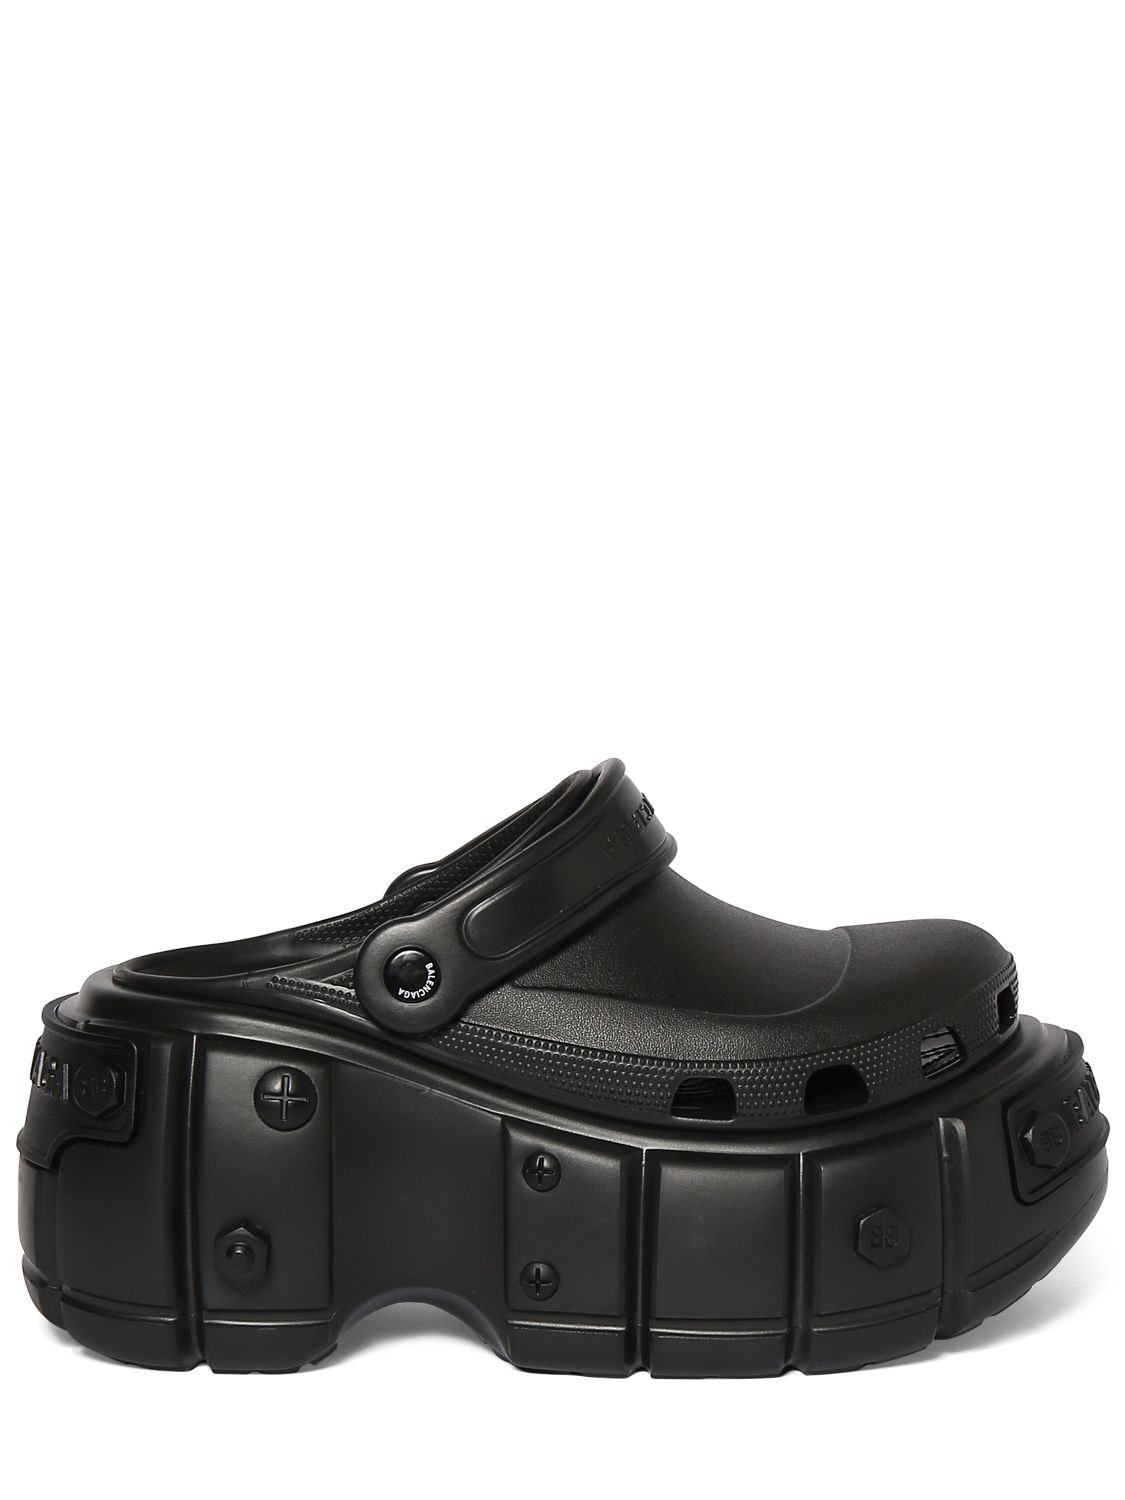 Image of 110mm Hardcrocs Rubber Wedge Mules